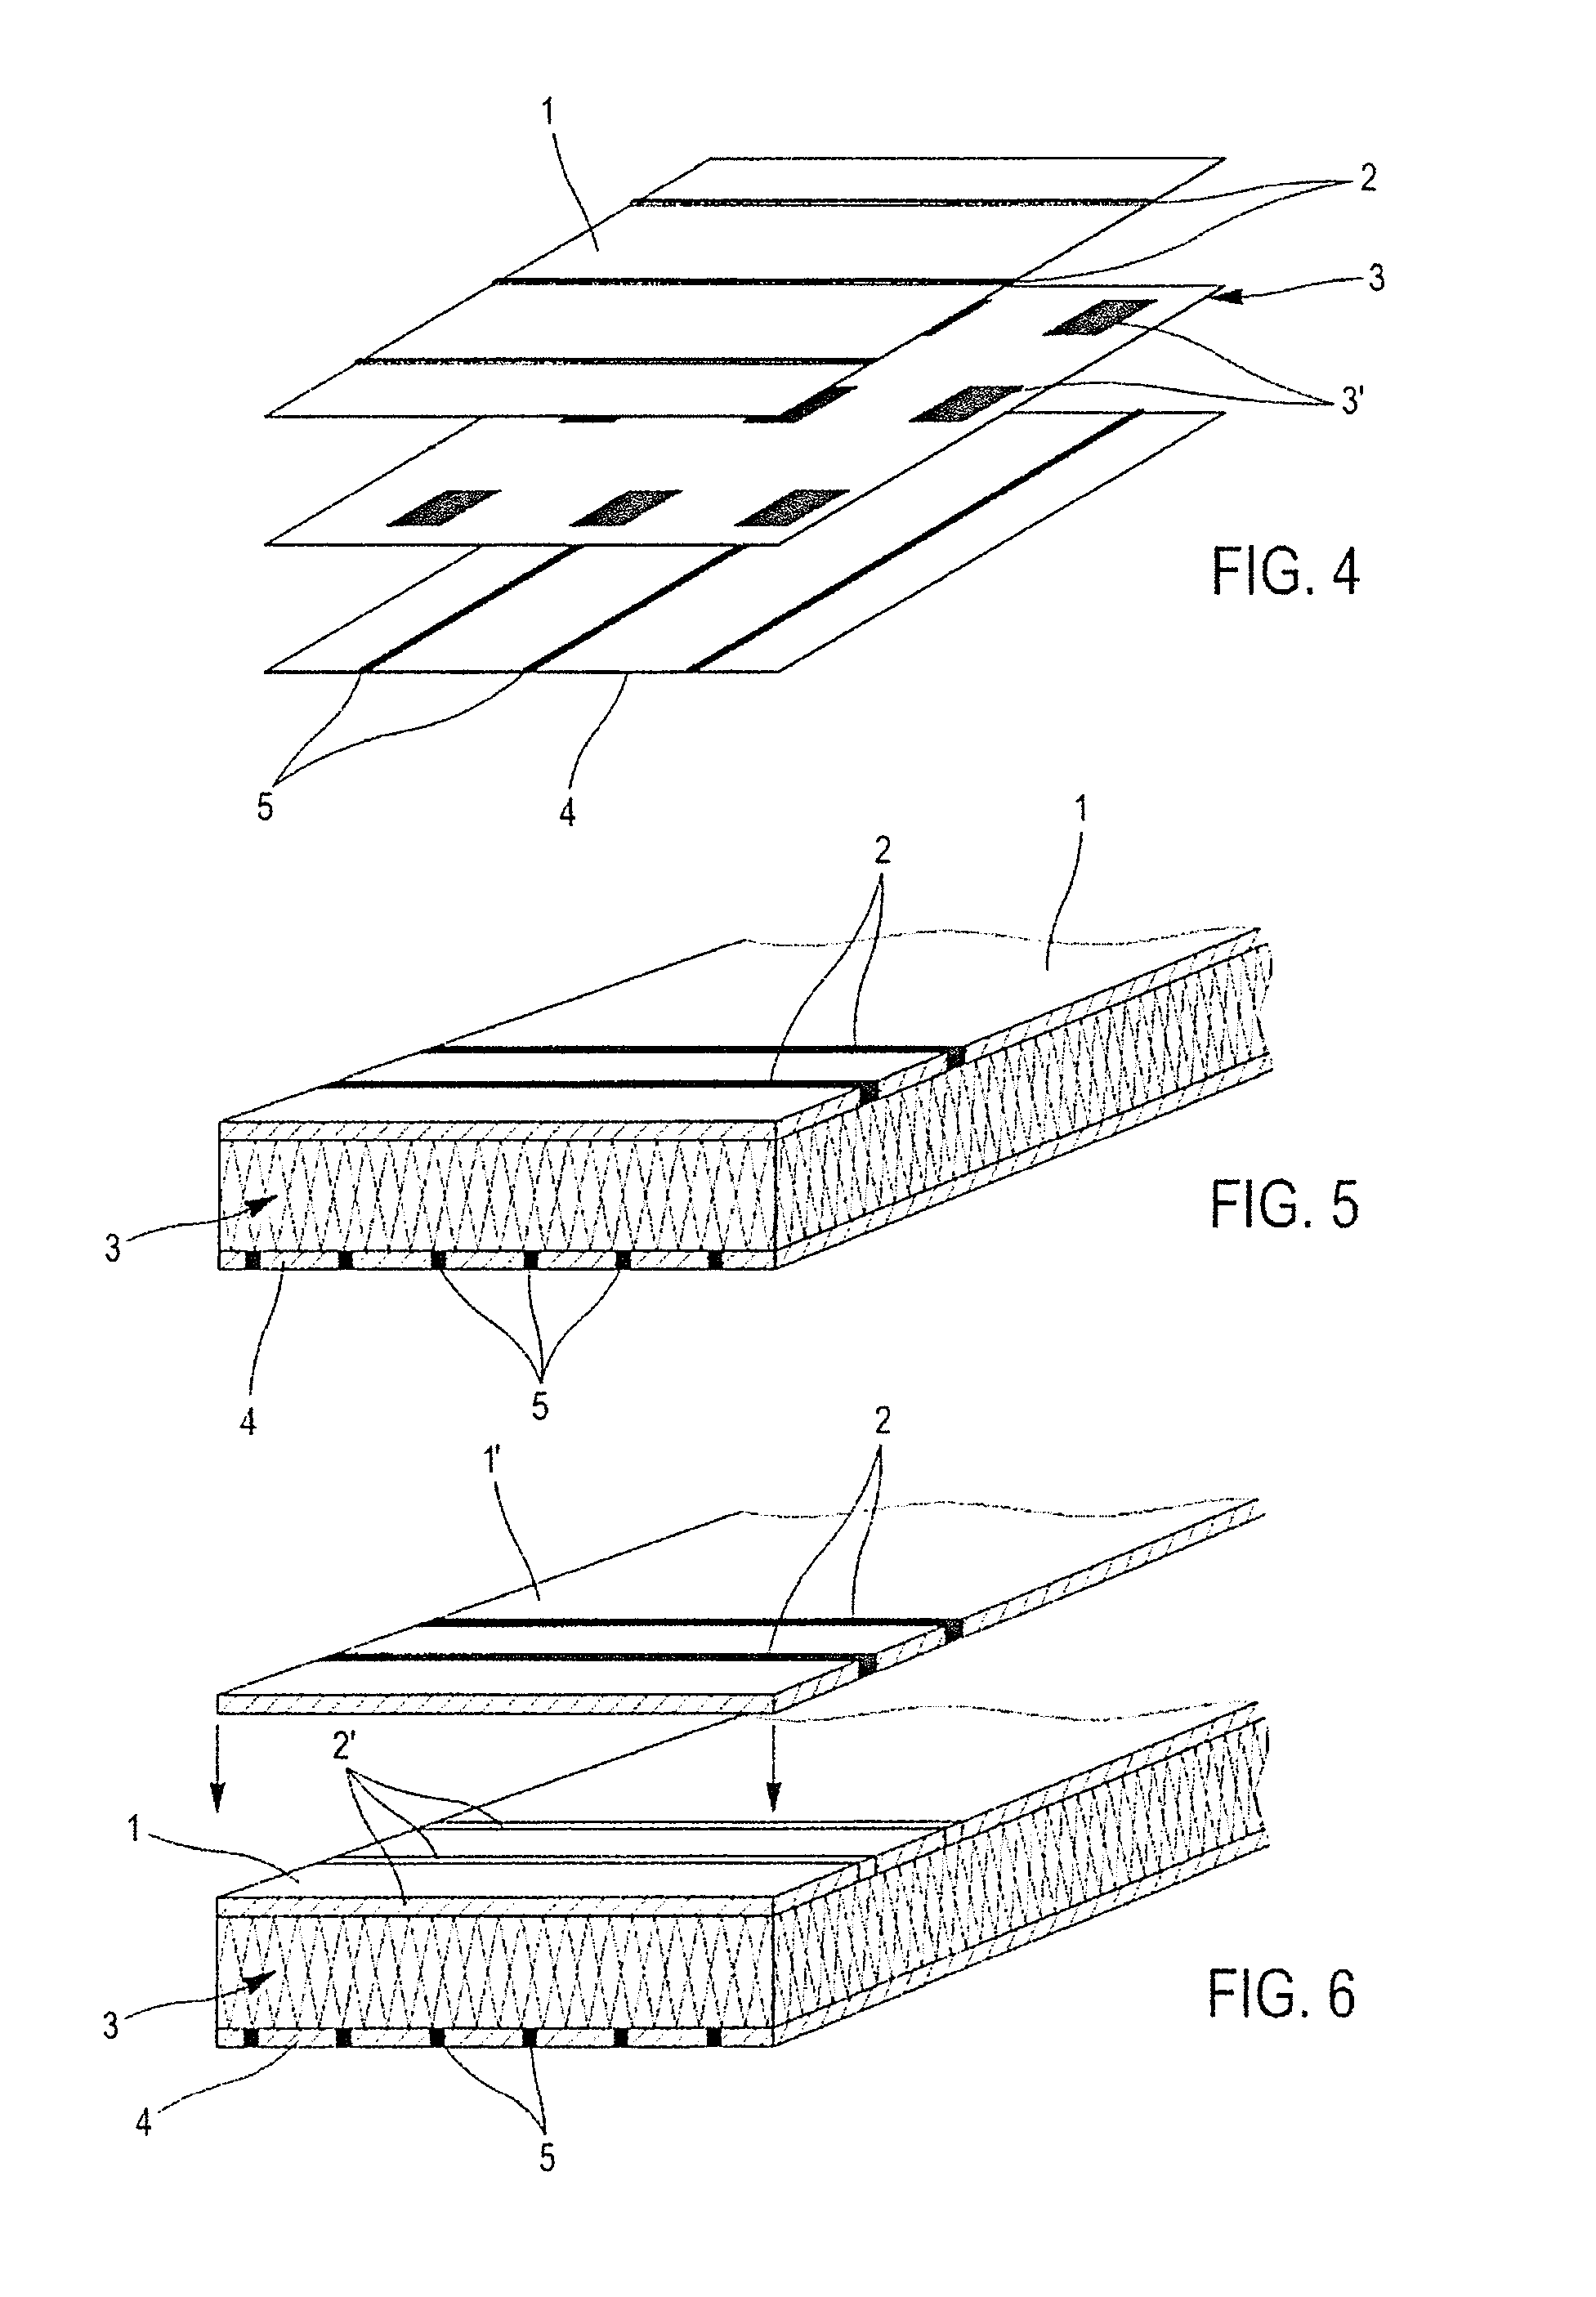 Device for measuring pressure from a flexible, pliable, and/or extensible object made from a textile material comprising a measurement device